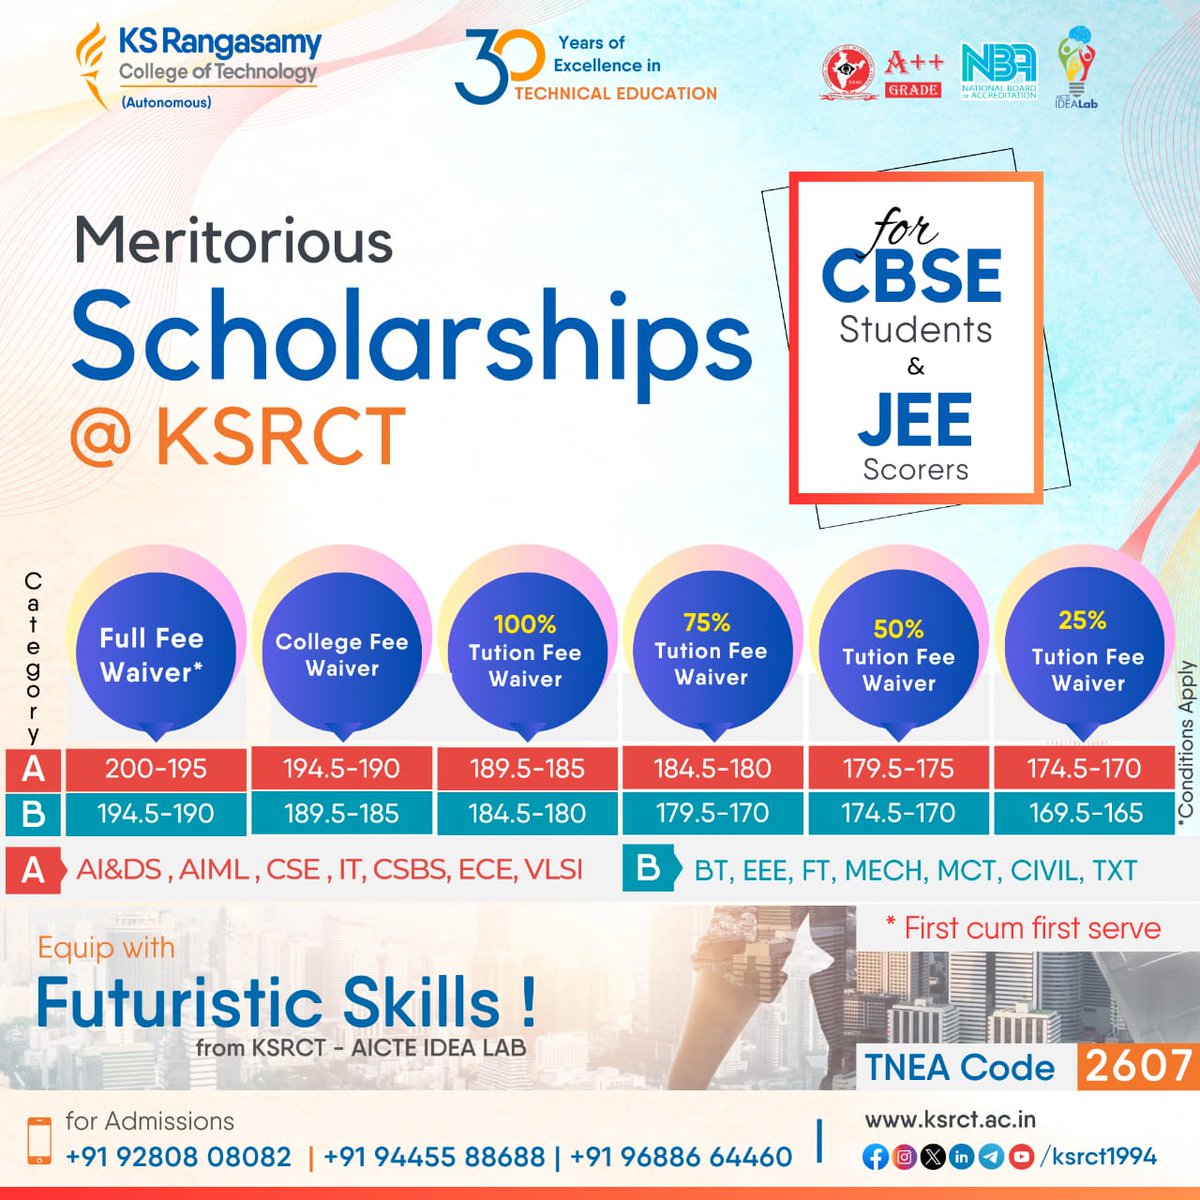 #Scholarship #CBSE #JEE 
#KSRCTians #MakingADifference #admission #admissions #education #collegeadmissions #admissionsopen #TNEACounselling #students #engineering #admissionopen #placement #enrollnow #learning #btech #college #TNEA #TNEA2607 #Scholarships #ksrct1994